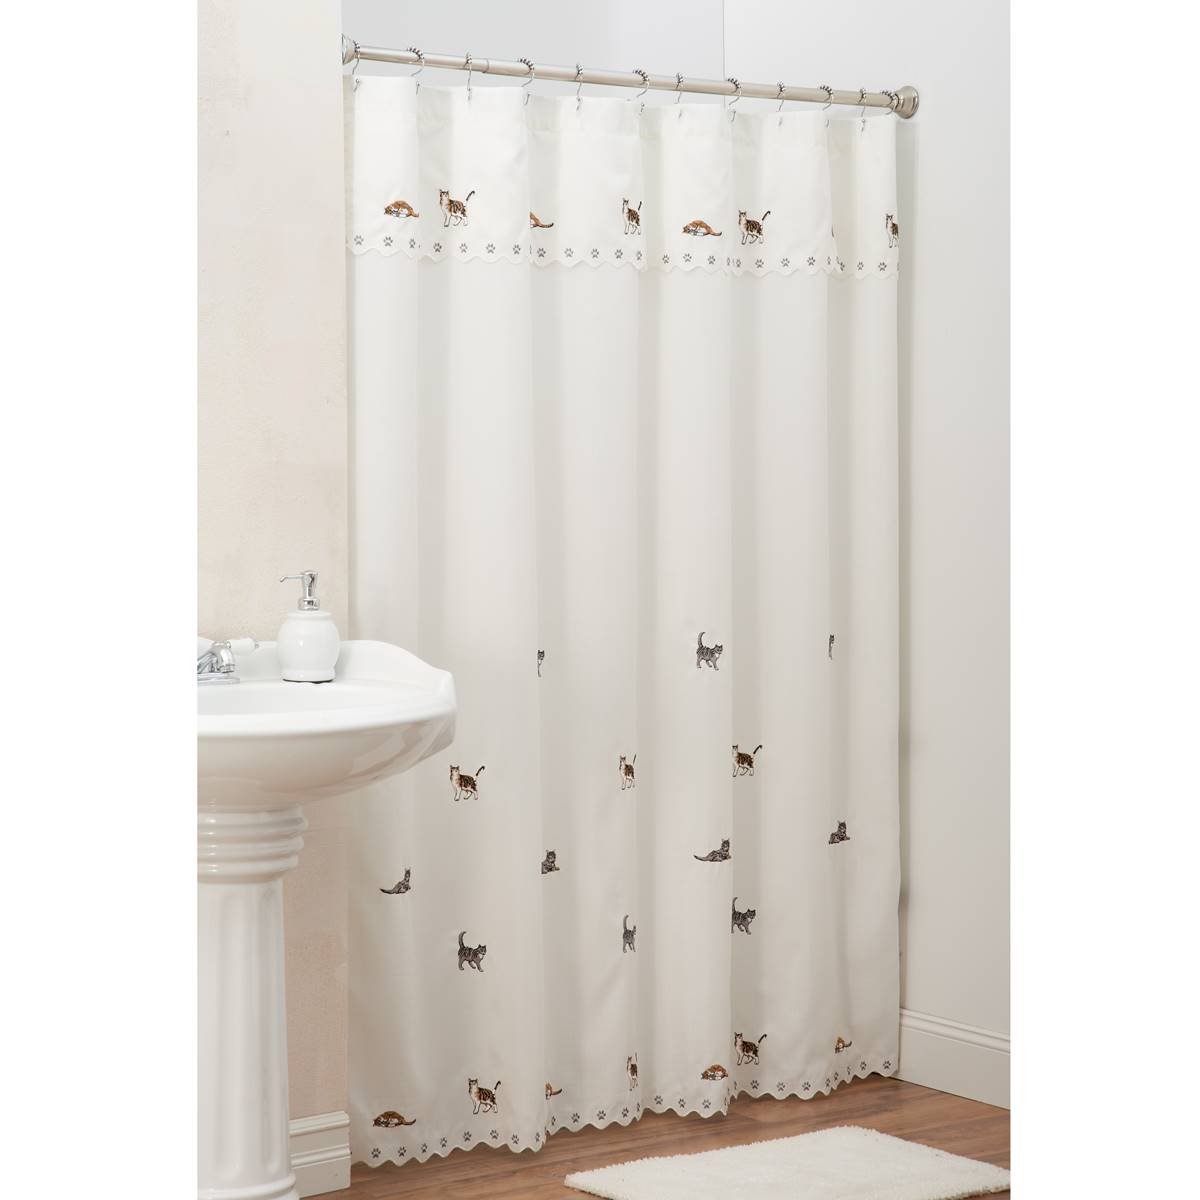 Embroidered Cats Shower Curtain with Valance